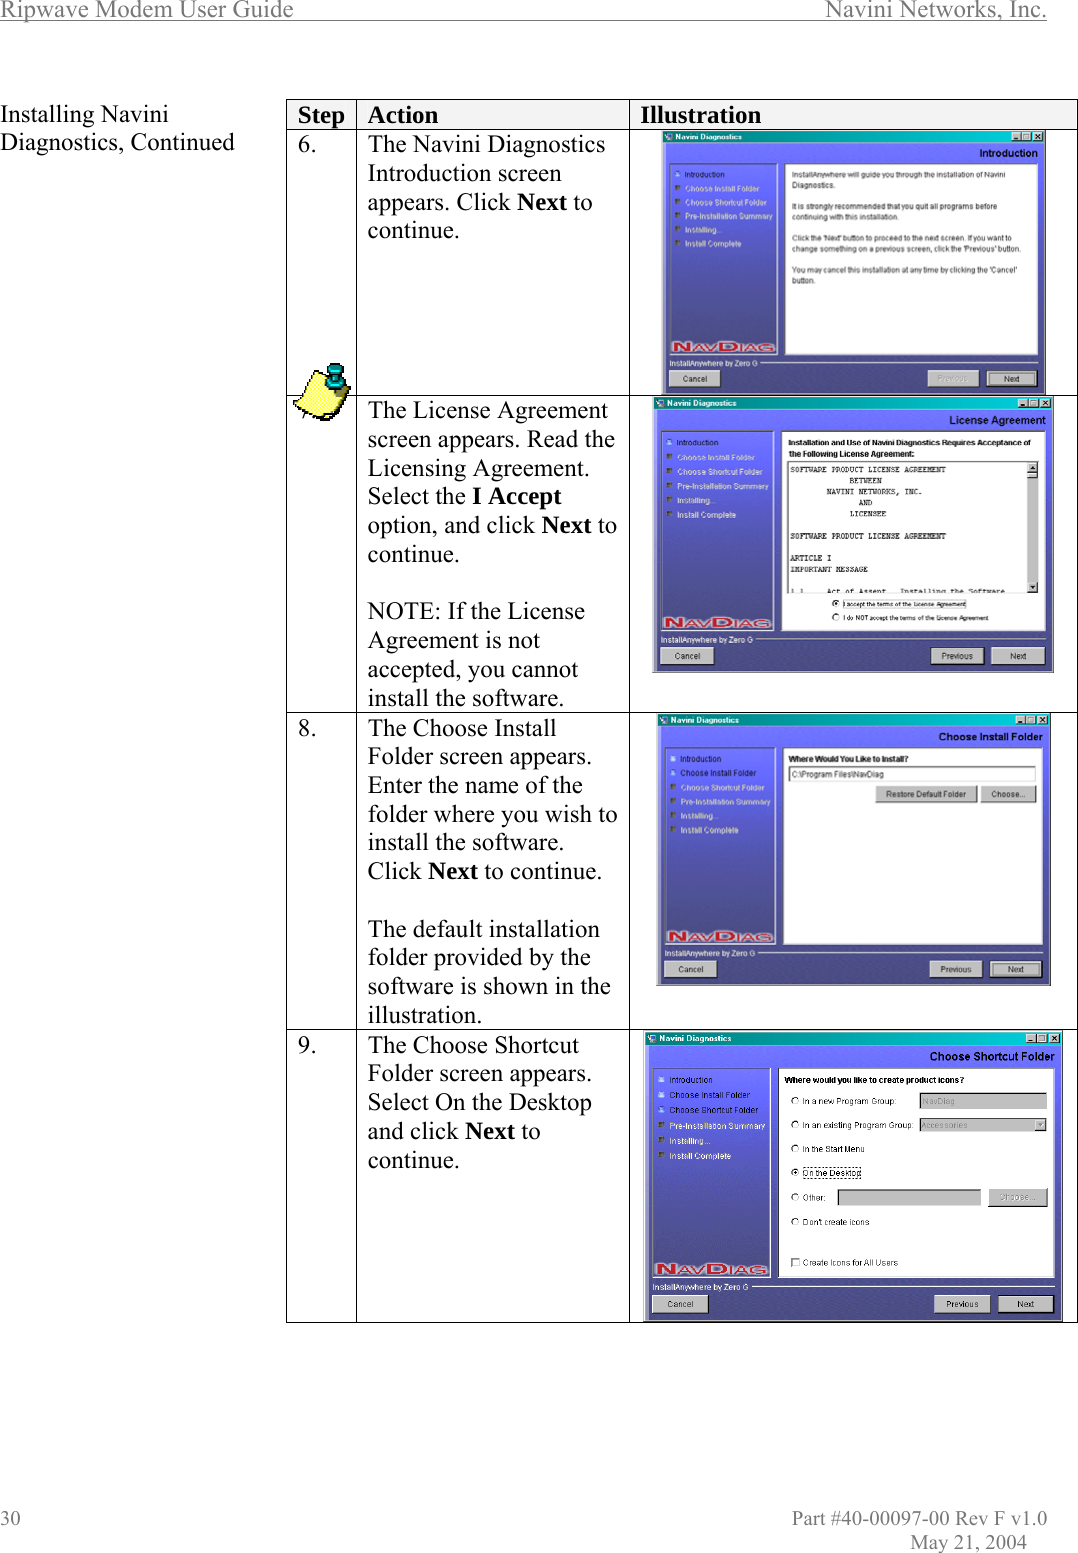 Ripwave Modem User Guide        Navini Networks, Inc.                         Part #40-00097-00 Rev F v1.0               May 21, 2004 stalling Navini iagnostics, Continued            InD                                 Step  Action  Illustration 6.   The Navini DiagnosticsIntroduction screen appears. Click Next to continue.  7.  The License Agreemenscreen appears. Read thLicensing Agreement. Select the I Accept option, and t e click Next to continue.  NOTE: If the License not e. Agreement is not accepted, you caninstall the softwar 8.  appears. Enter the name of the folder where you wish to install the software. Click Next to continue.  The default installation folder provided by the software is shown in the The Choose Install Folder screenillustration.  9.  eThe Choos  Shortc t e rs. Select On the Desktop and click Next to continue. uaFolder screen app     30         